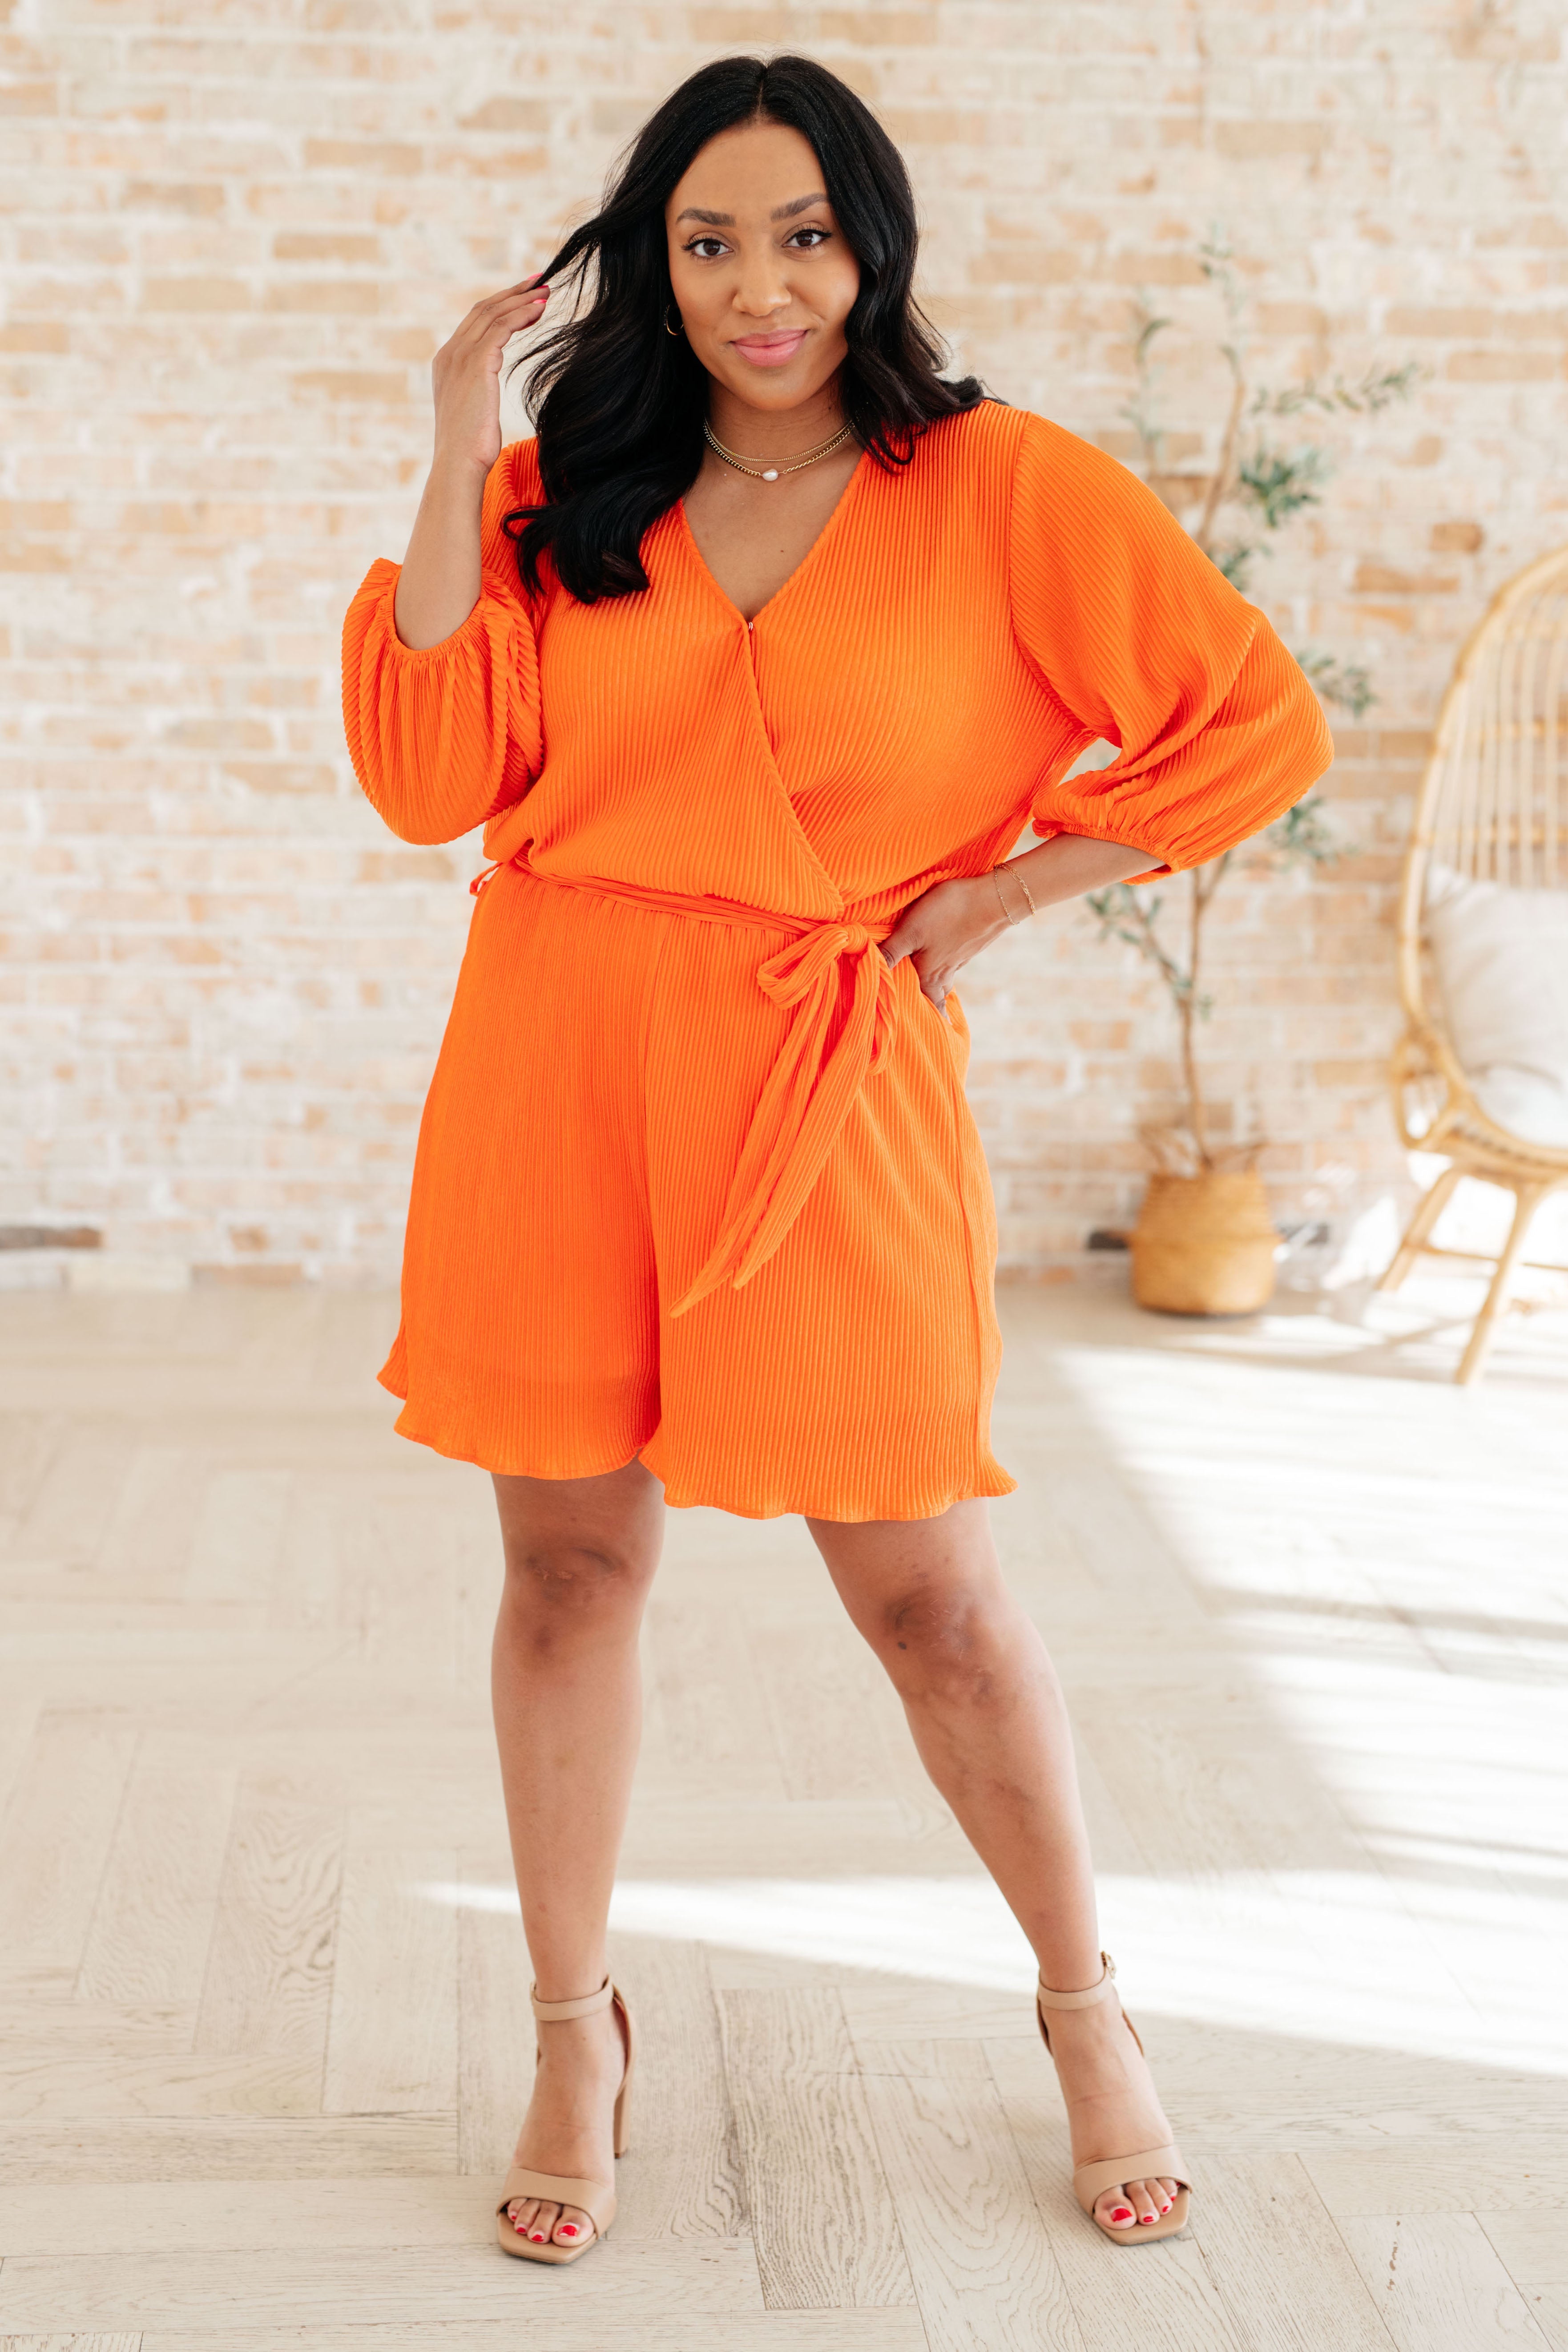 White Birch Roll With me Romper in Tangerine